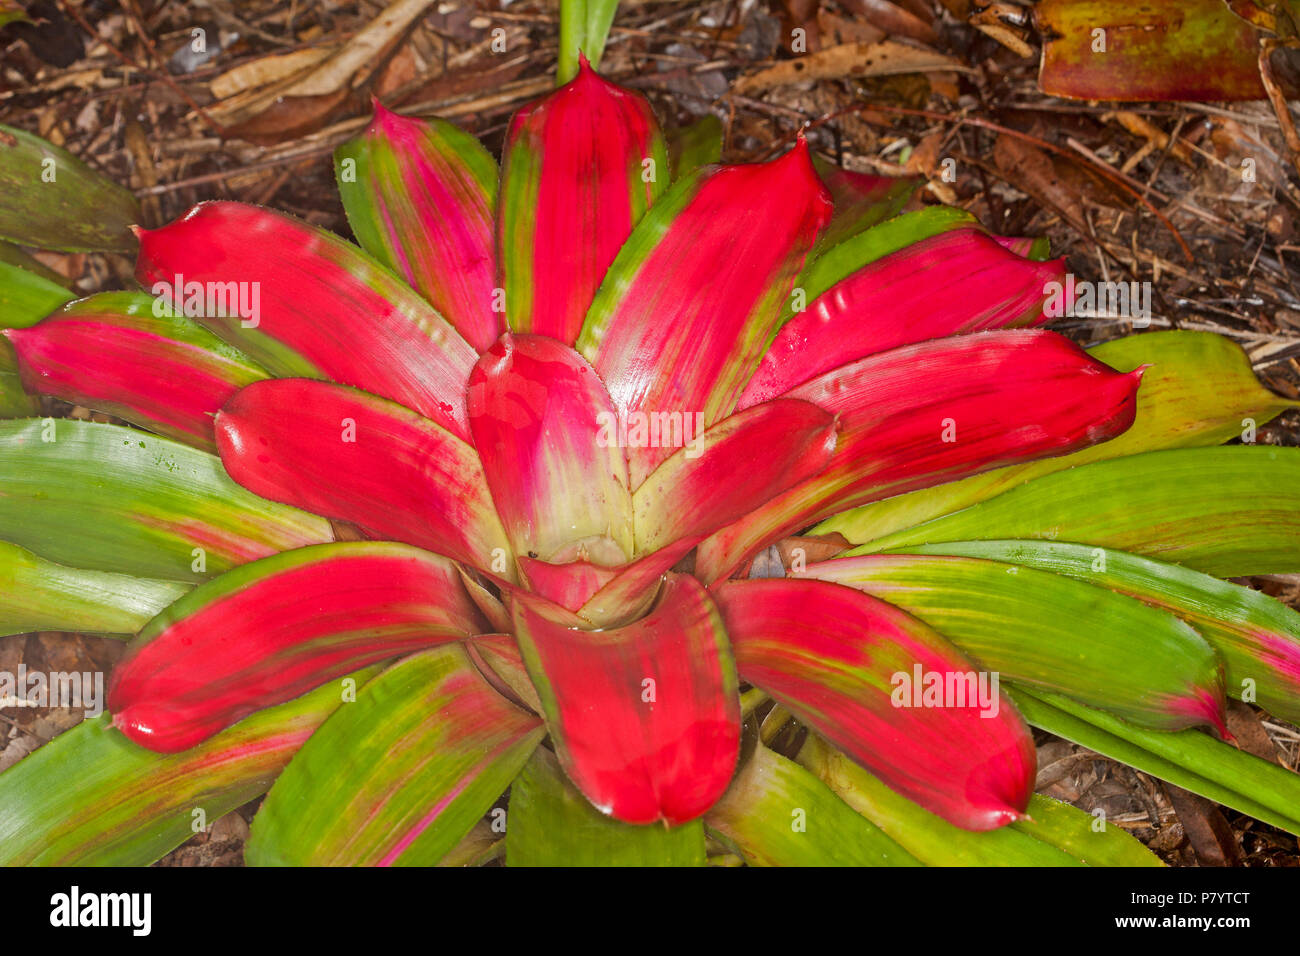 Bromeliad, Neoregelia 'Star No. 1 Performer', with vivid red and green foliage Stock Photo